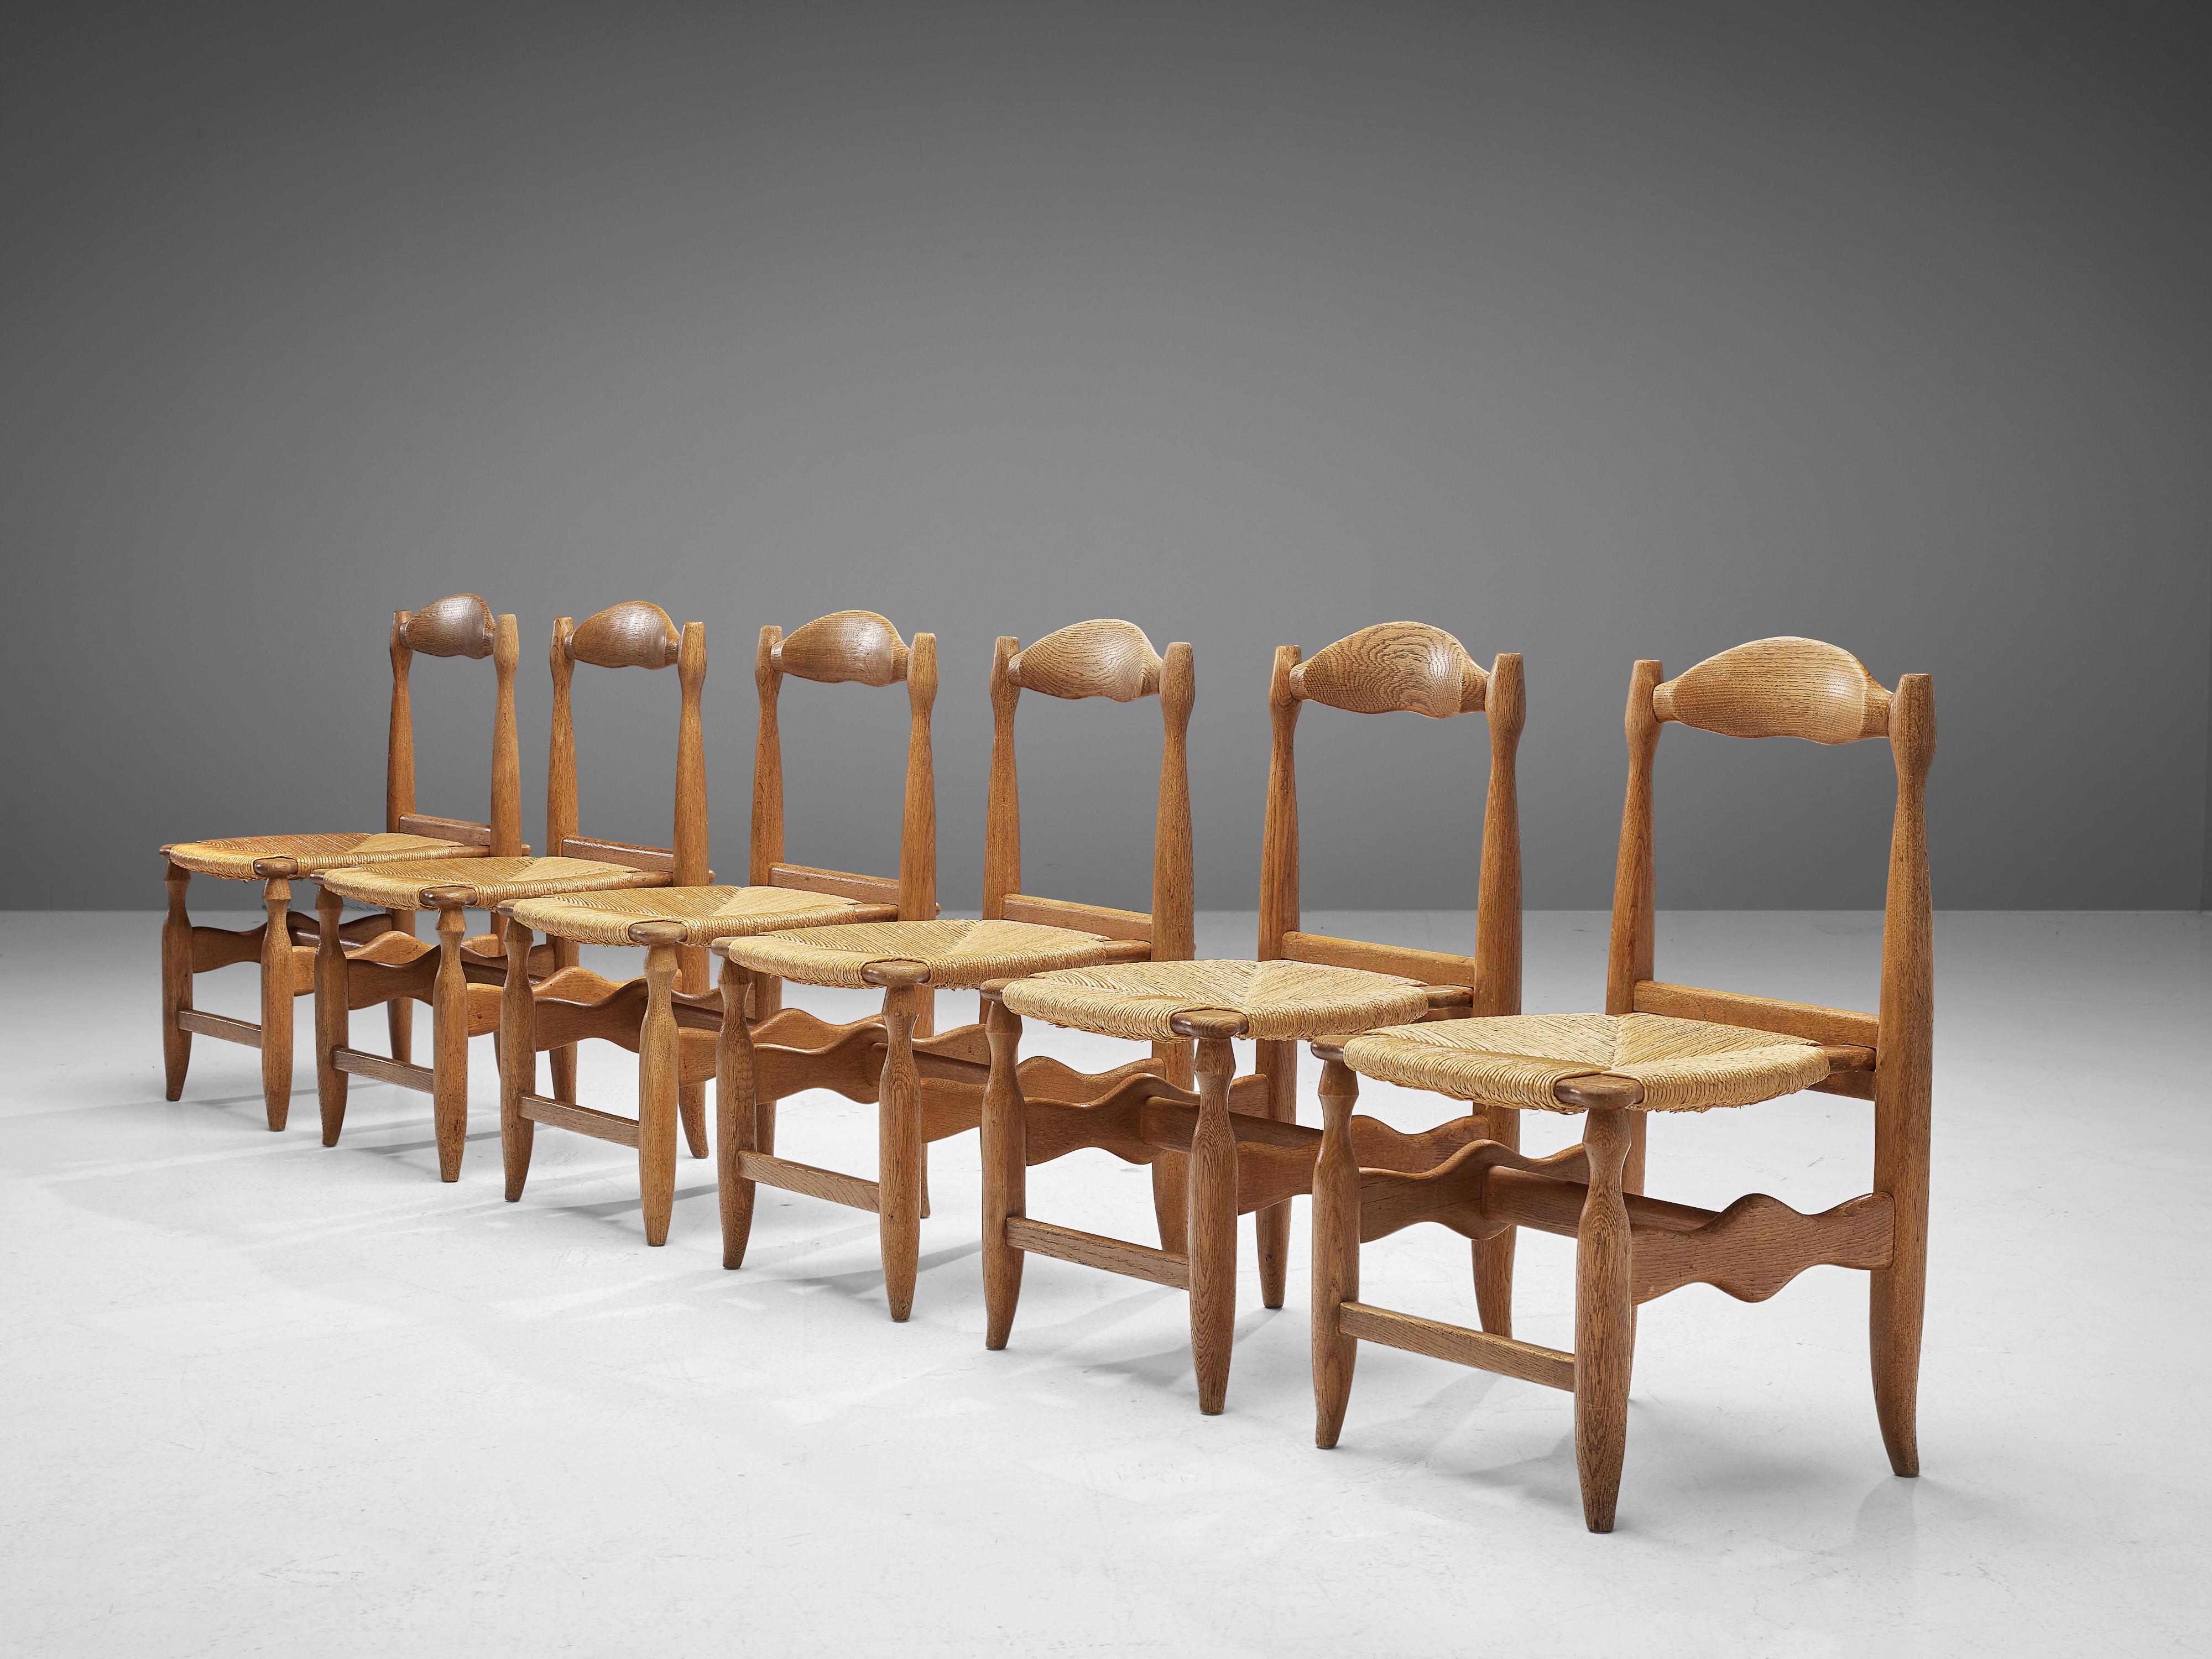 Guillerme & Chambron for Votre Maison, dining chairs model 'Charlotte', oak, straw, France, 1960s

Set of six rustic, yet elegant dining chairs in solid oak by Guillerme & Chambron. These chairs show the characteristic frame of this French